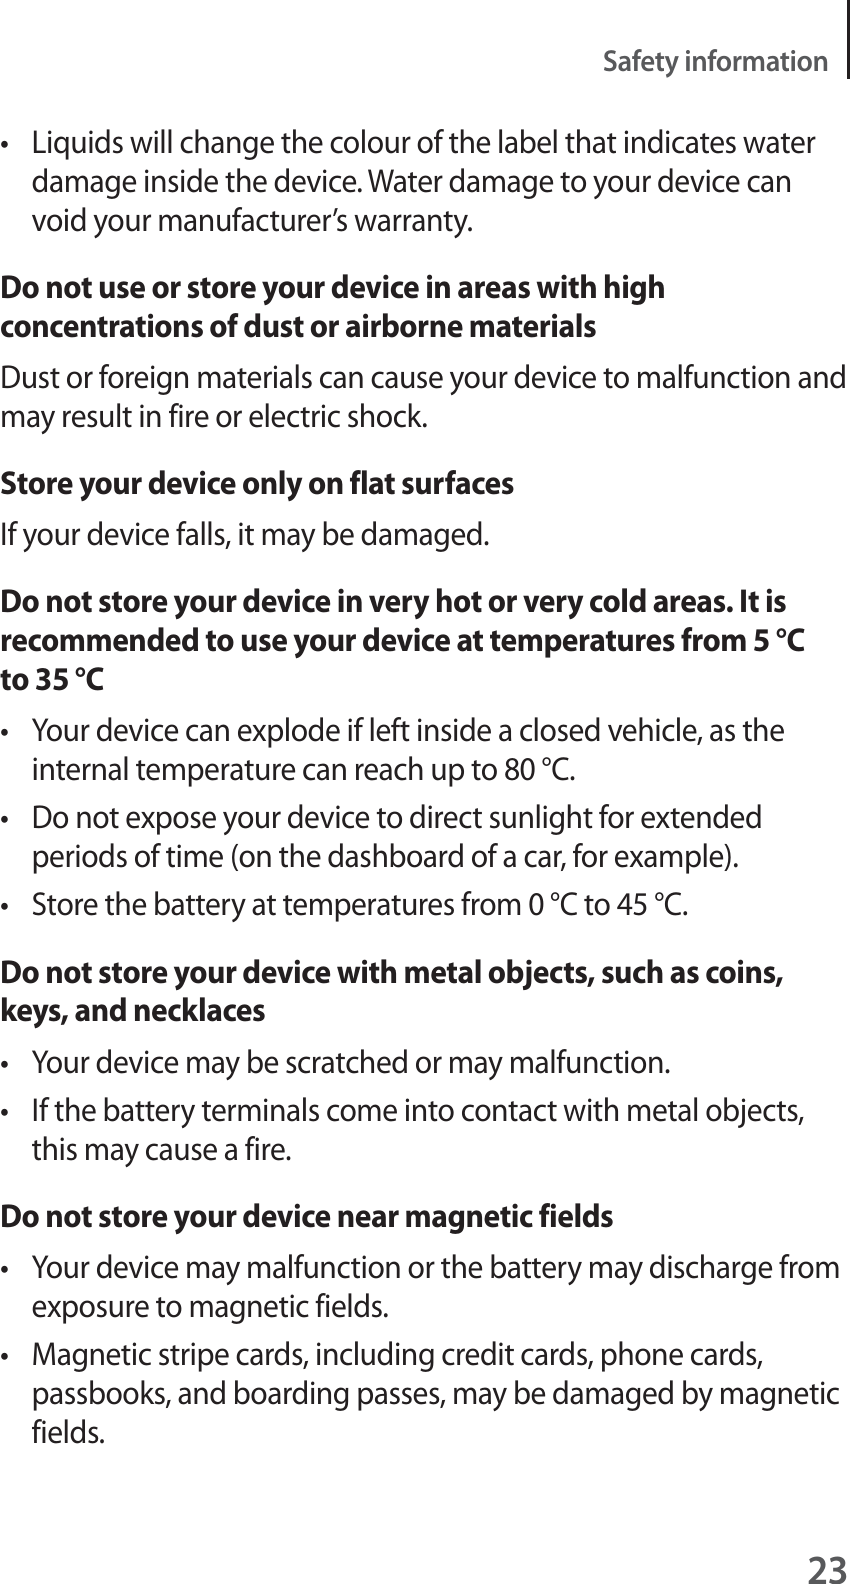 23Safety informationt Liquids will change the colour of the label that indicates water damage inside the device. Water damage to your device can void your manufacturer’s warranty.Do not use or store your device in areas with high concentrations of dust or airborne materialsDust or foreign materials can cause your device to malfunction and may result in fire or electric shock.Store your device only on flat surfacesIf your device falls, it may be damaged.Do not store your device in very hot or very cold areas. It is recommended to use your device at temperatures from 5 °C to 35 °Ct Your device can explode if left inside a closed vehicle, as the internal temperature can reach up to 80 °C.t Do not expose your device to direct sunlight for extended periods of time (on the dashboard of a car, for example).t Store the battery at temperatures from 0 °C to 45 °C.Do not store your device with metal objects, such as coins, keys, and necklacest Your device may be scratched or may malfunction.t If the battery terminals come into contact with metal objects, this may cause a fire.Do not store your device near magnetic fieldst Your device may malfunction or the battery may discharge from exposure to magnetic fields.t Magnetic stripe cards, including credit cards, phone cards, passbooks, and boarding passes, may be damaged by magnetic fields.